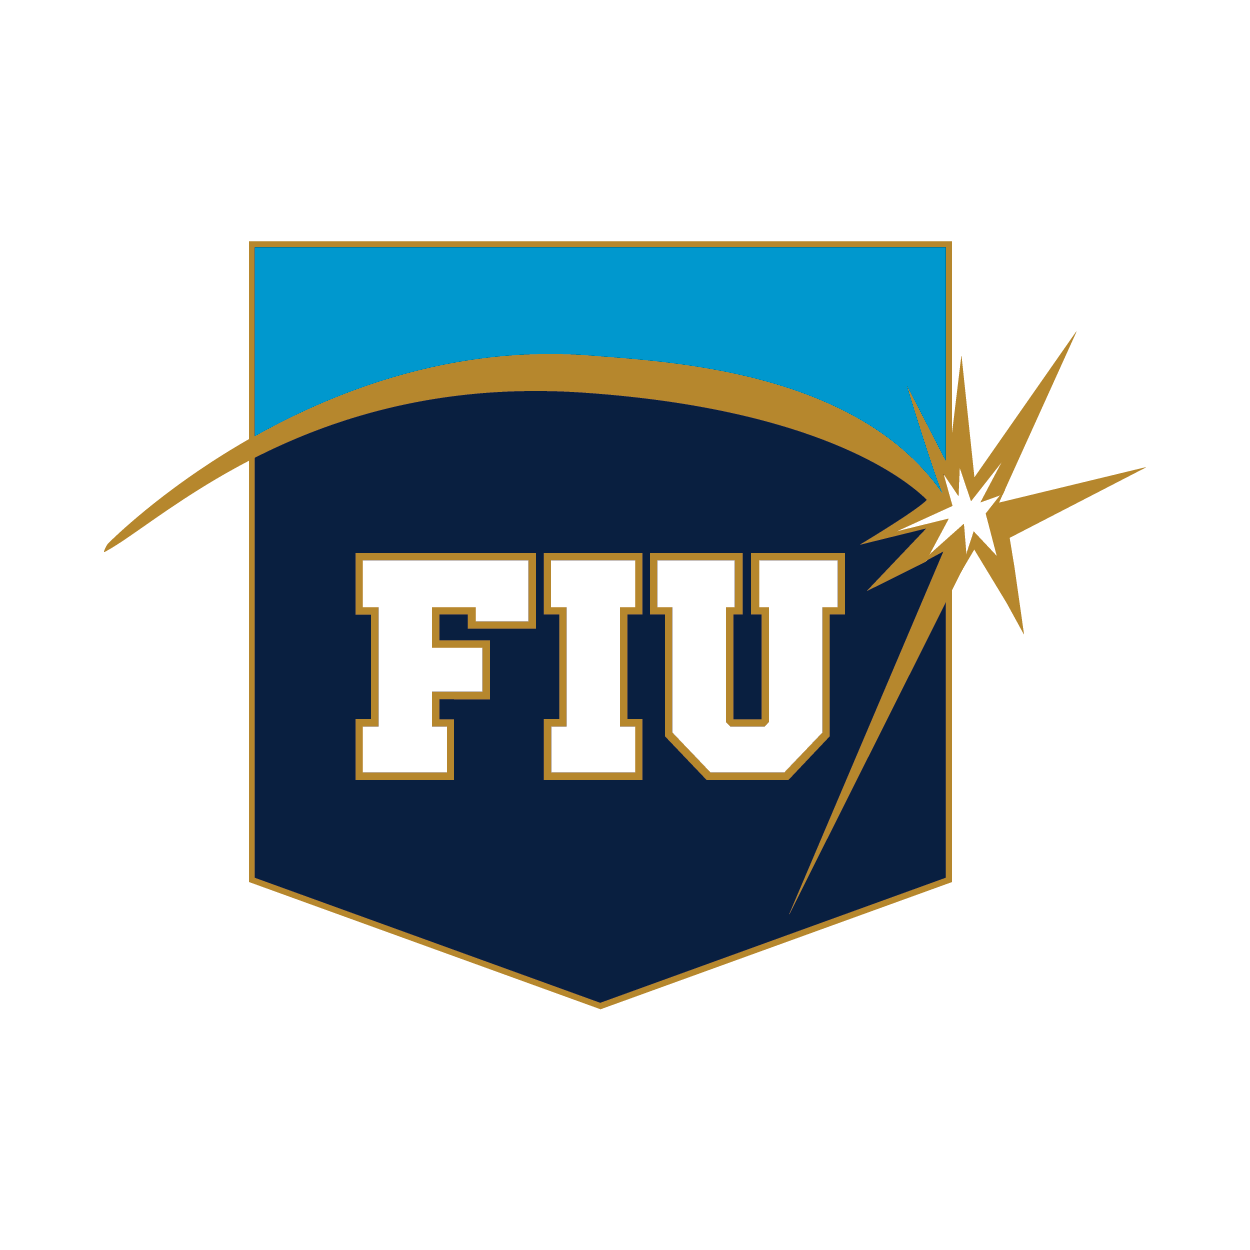 The 2019 pin is a shield shape in navy blue with FIU in the center in white and with a gold spark over it, at the top of the pin part of the shield shape is in sky blue